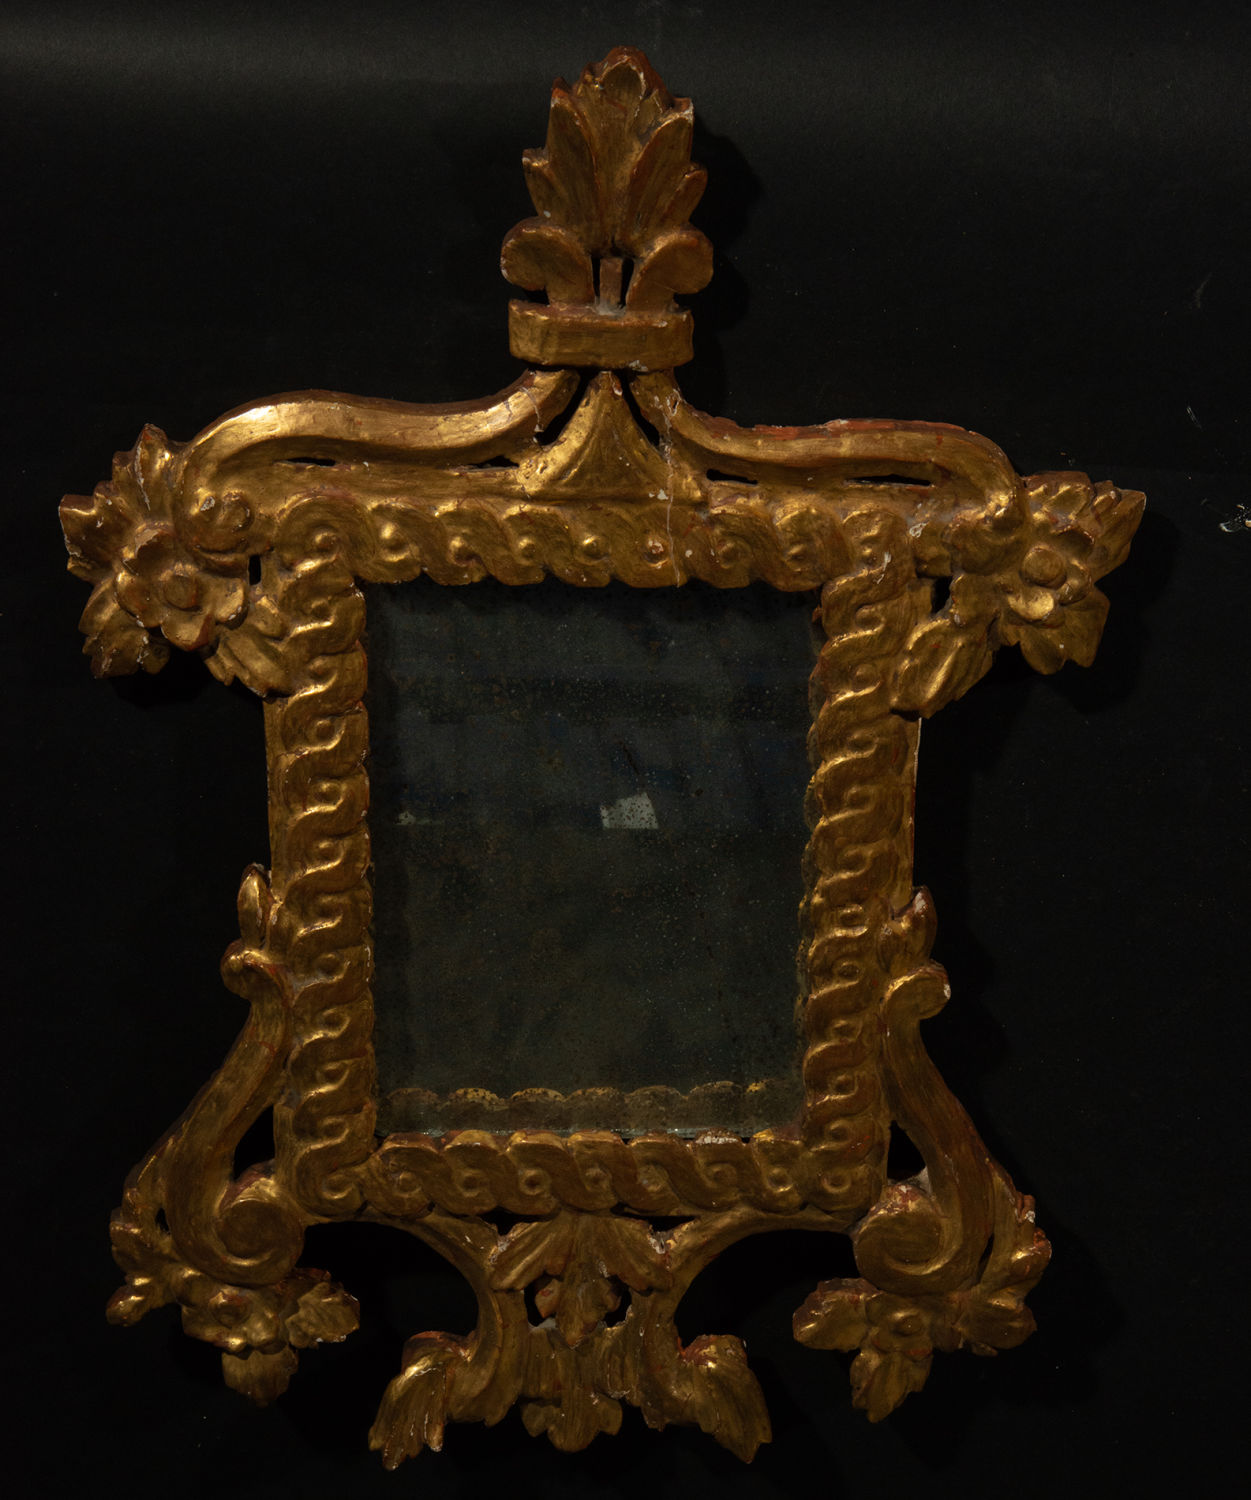 Cornucopia frame in wood gilded with gold leaf, 19th century